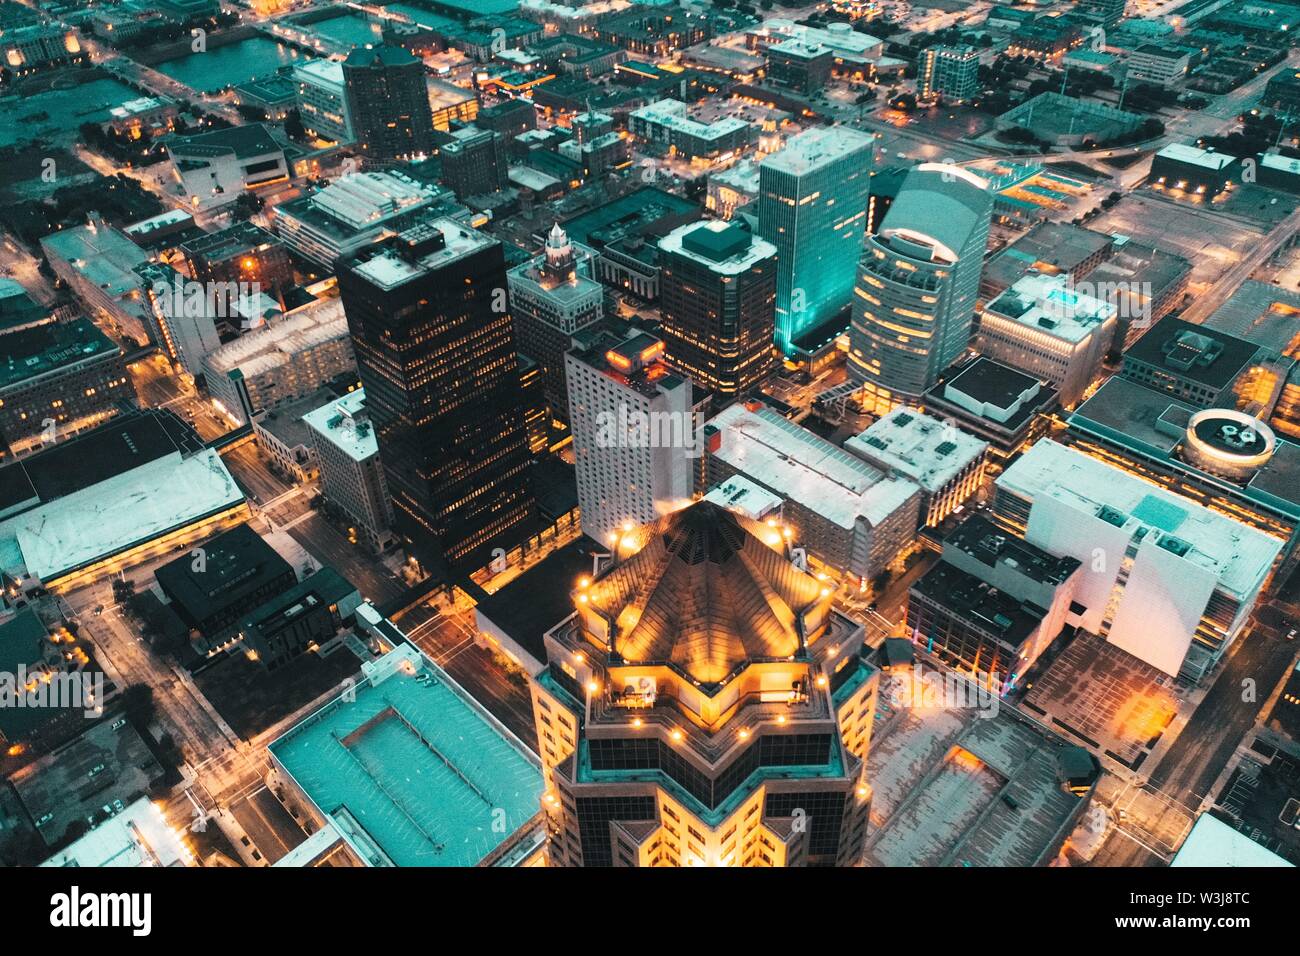 Aerial shot of the beautiful architecture of an urban city at night Stock Photo